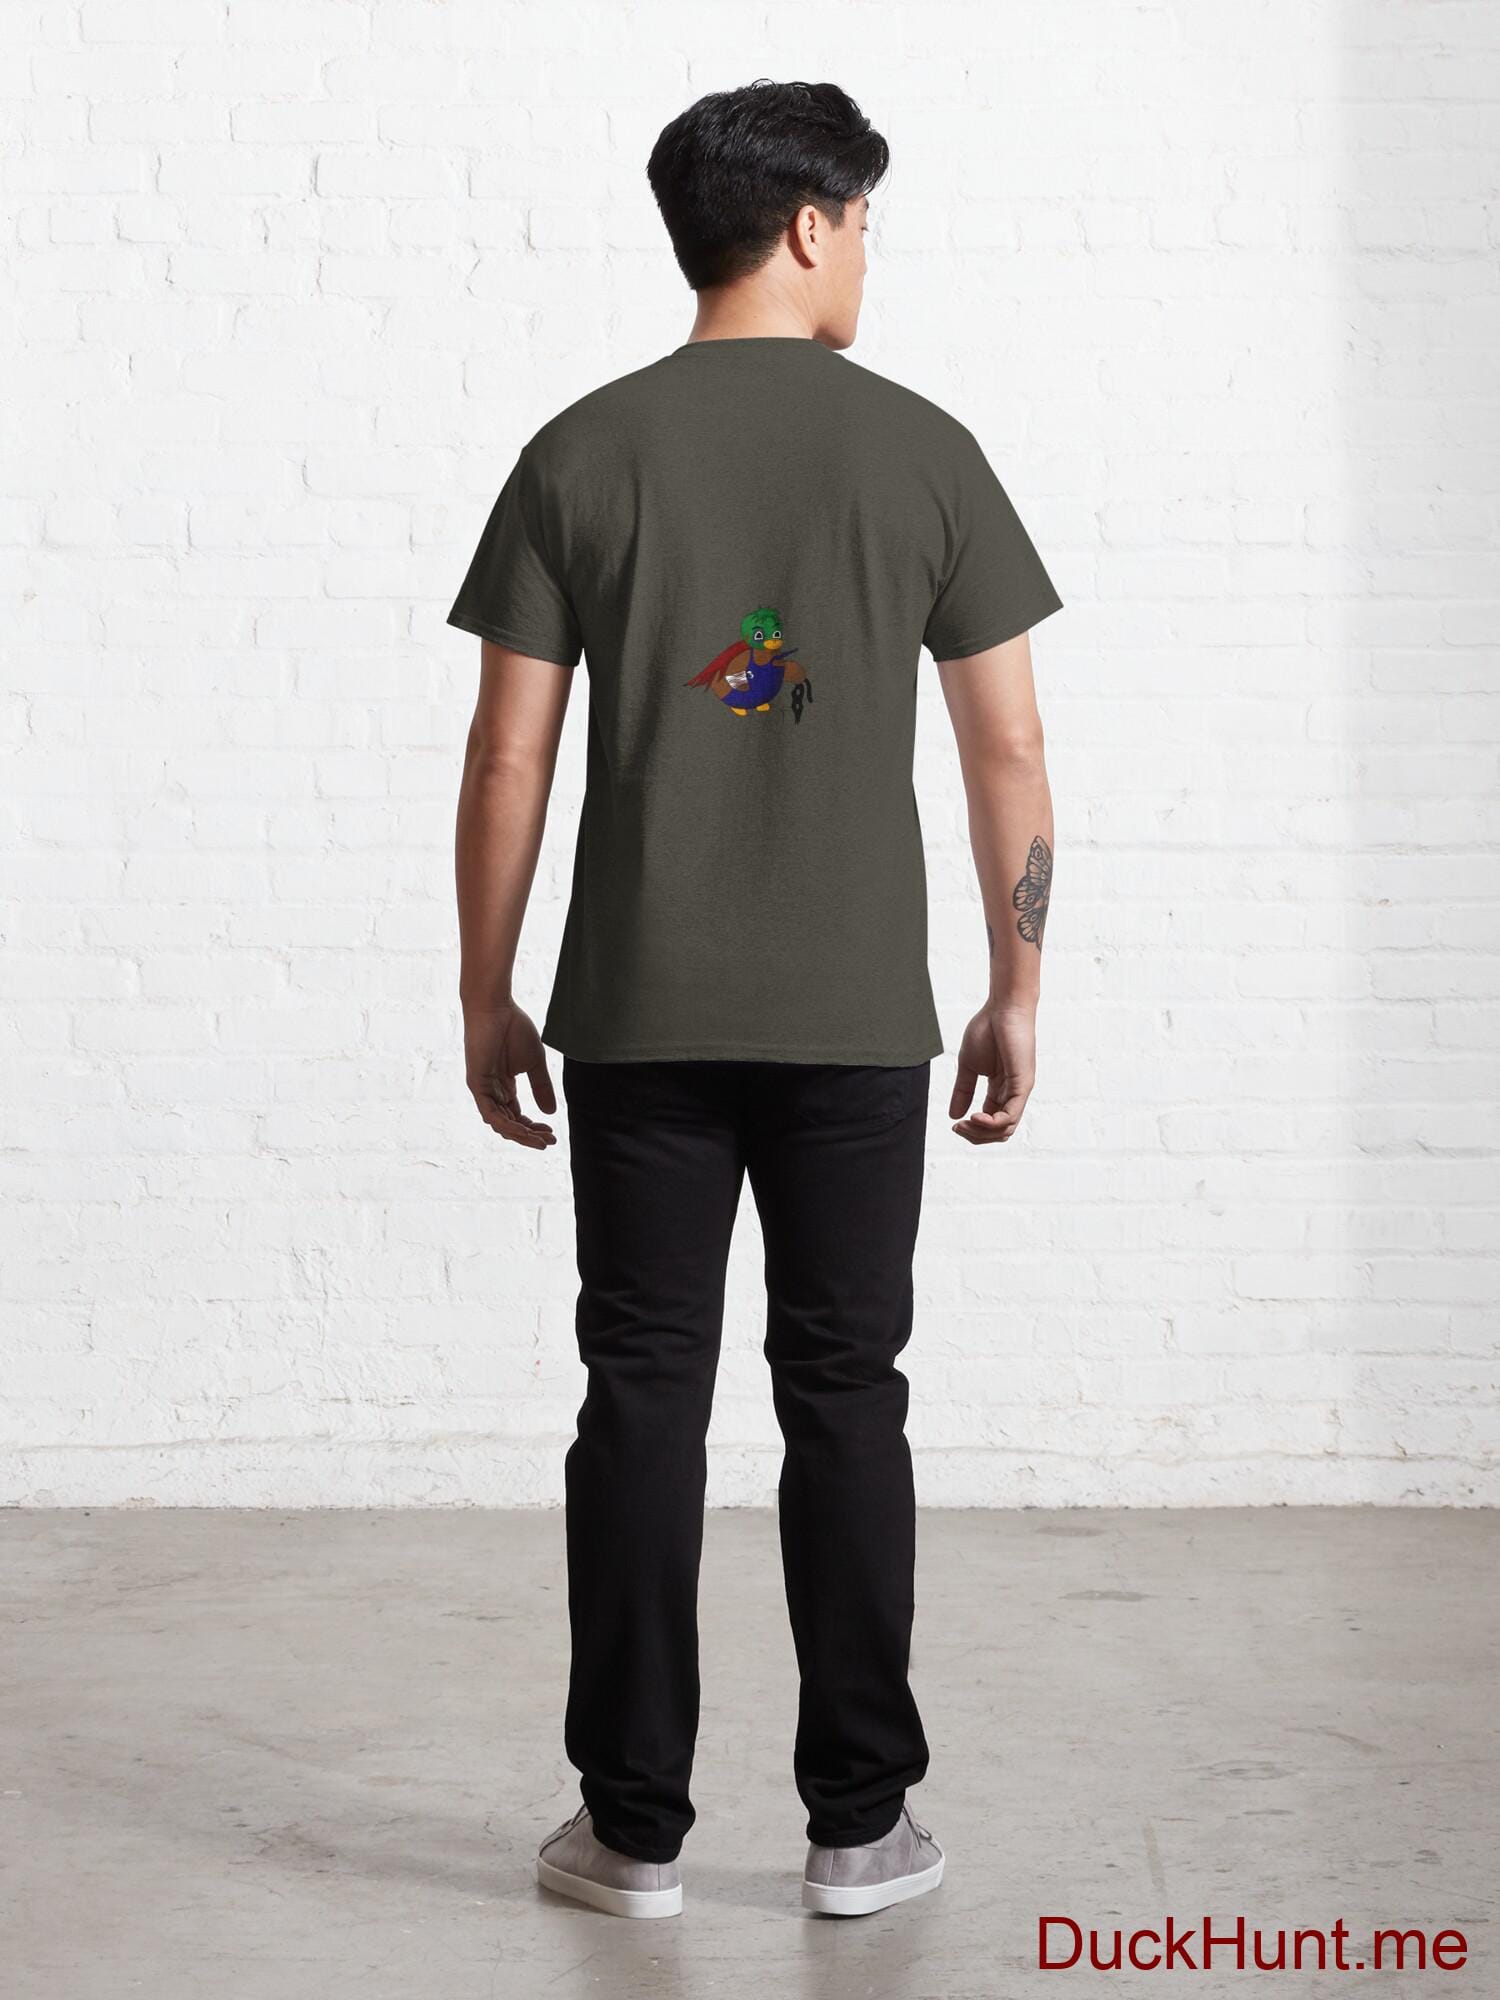 Dead DuckHunt Boss (smokeless) Army Classic T-Shirt (Back printed) alternative image 3